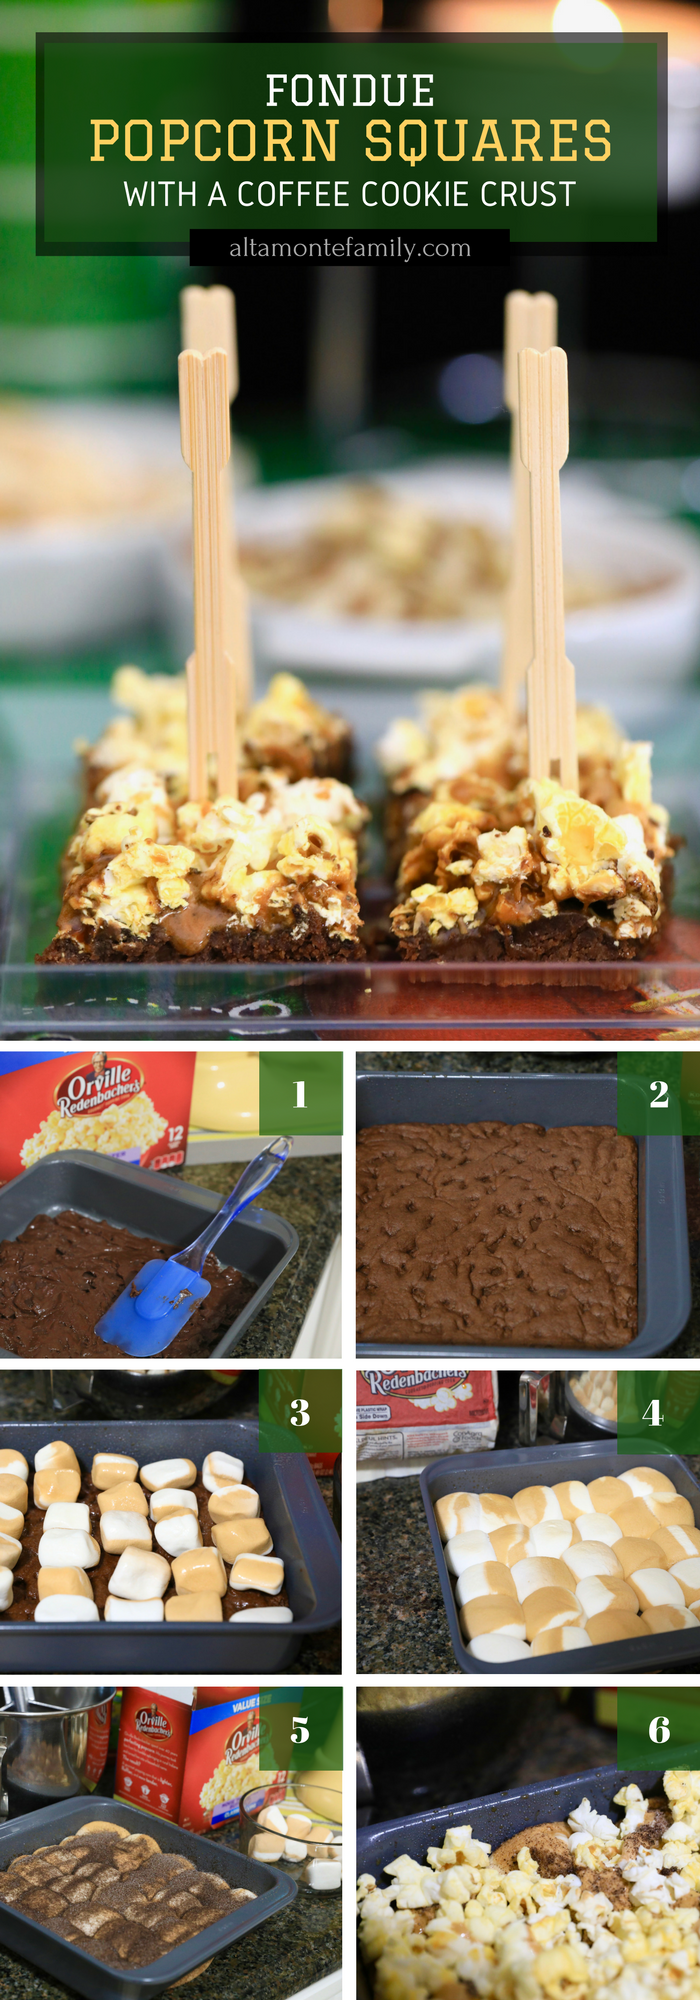 Fondue Popcorn Squares with Coffee Cookie Crust Recipe - Game Day Party Ideas